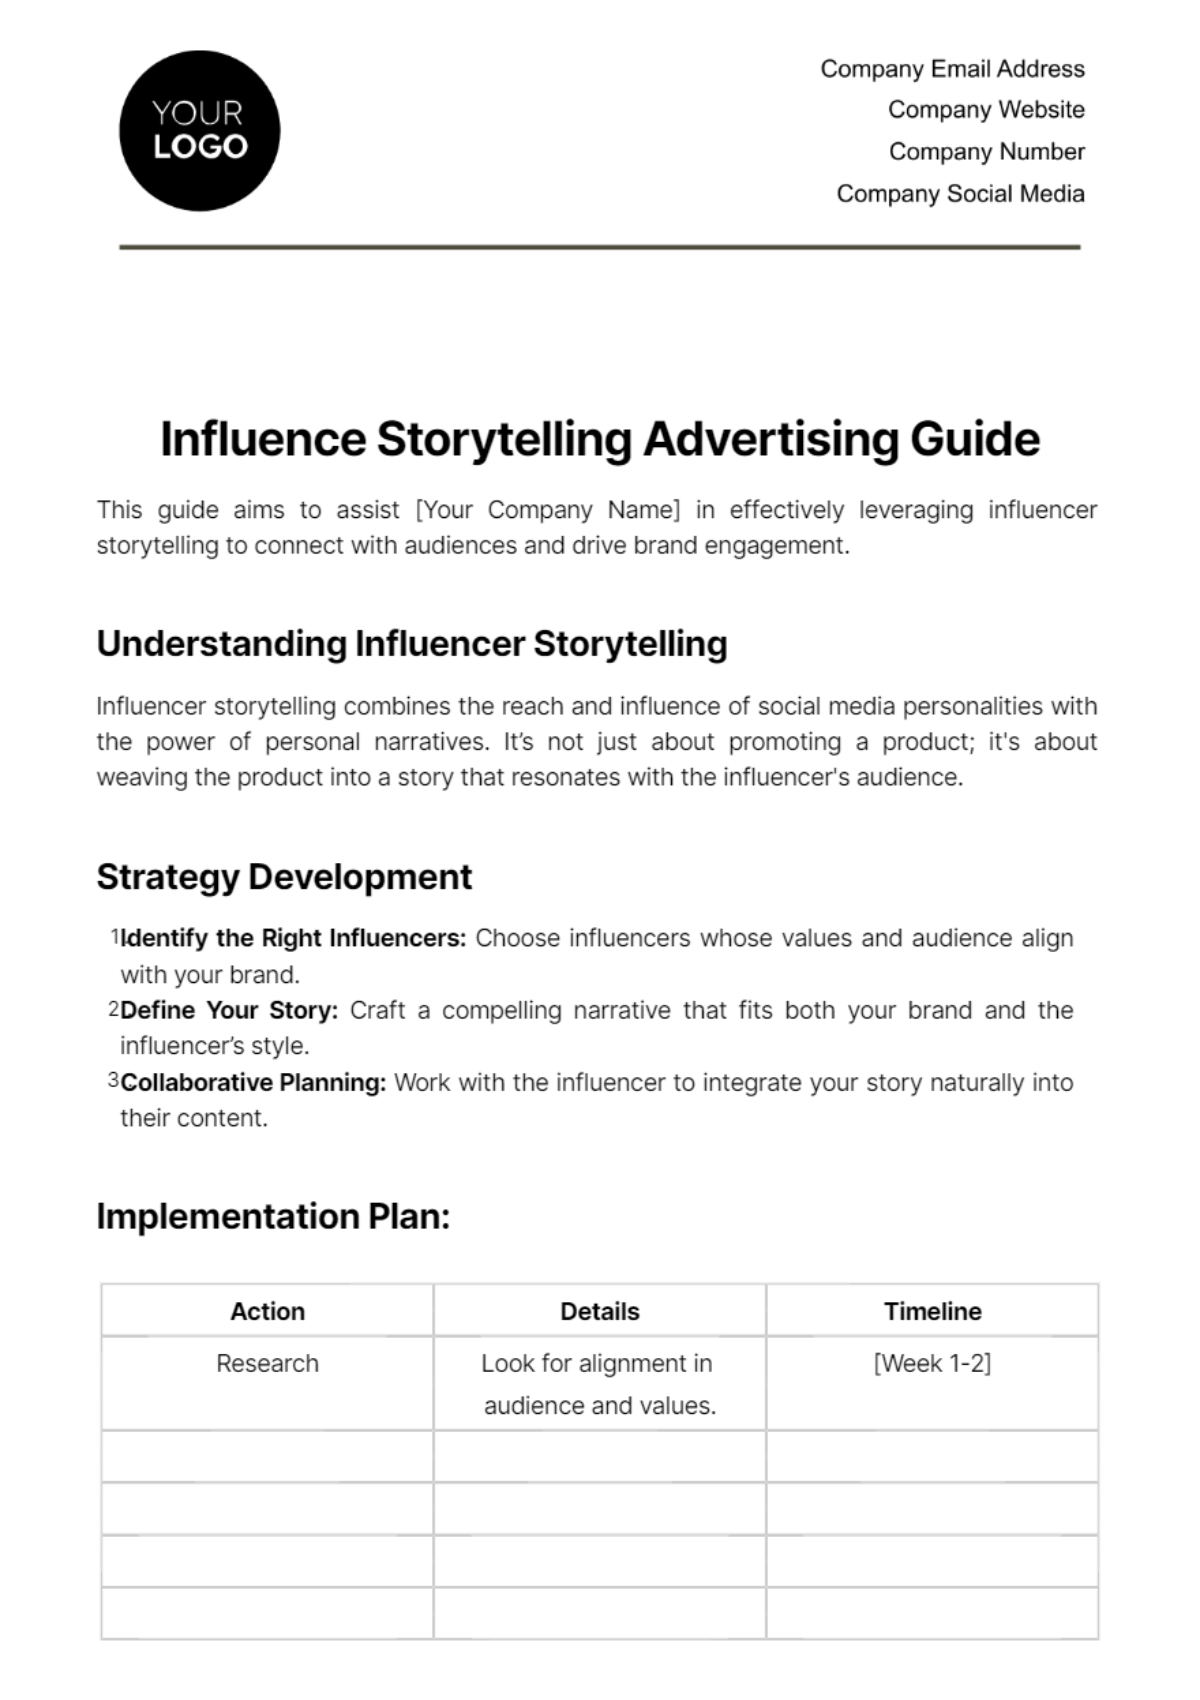 Free Influencer Storytelling Advertising Guide Template